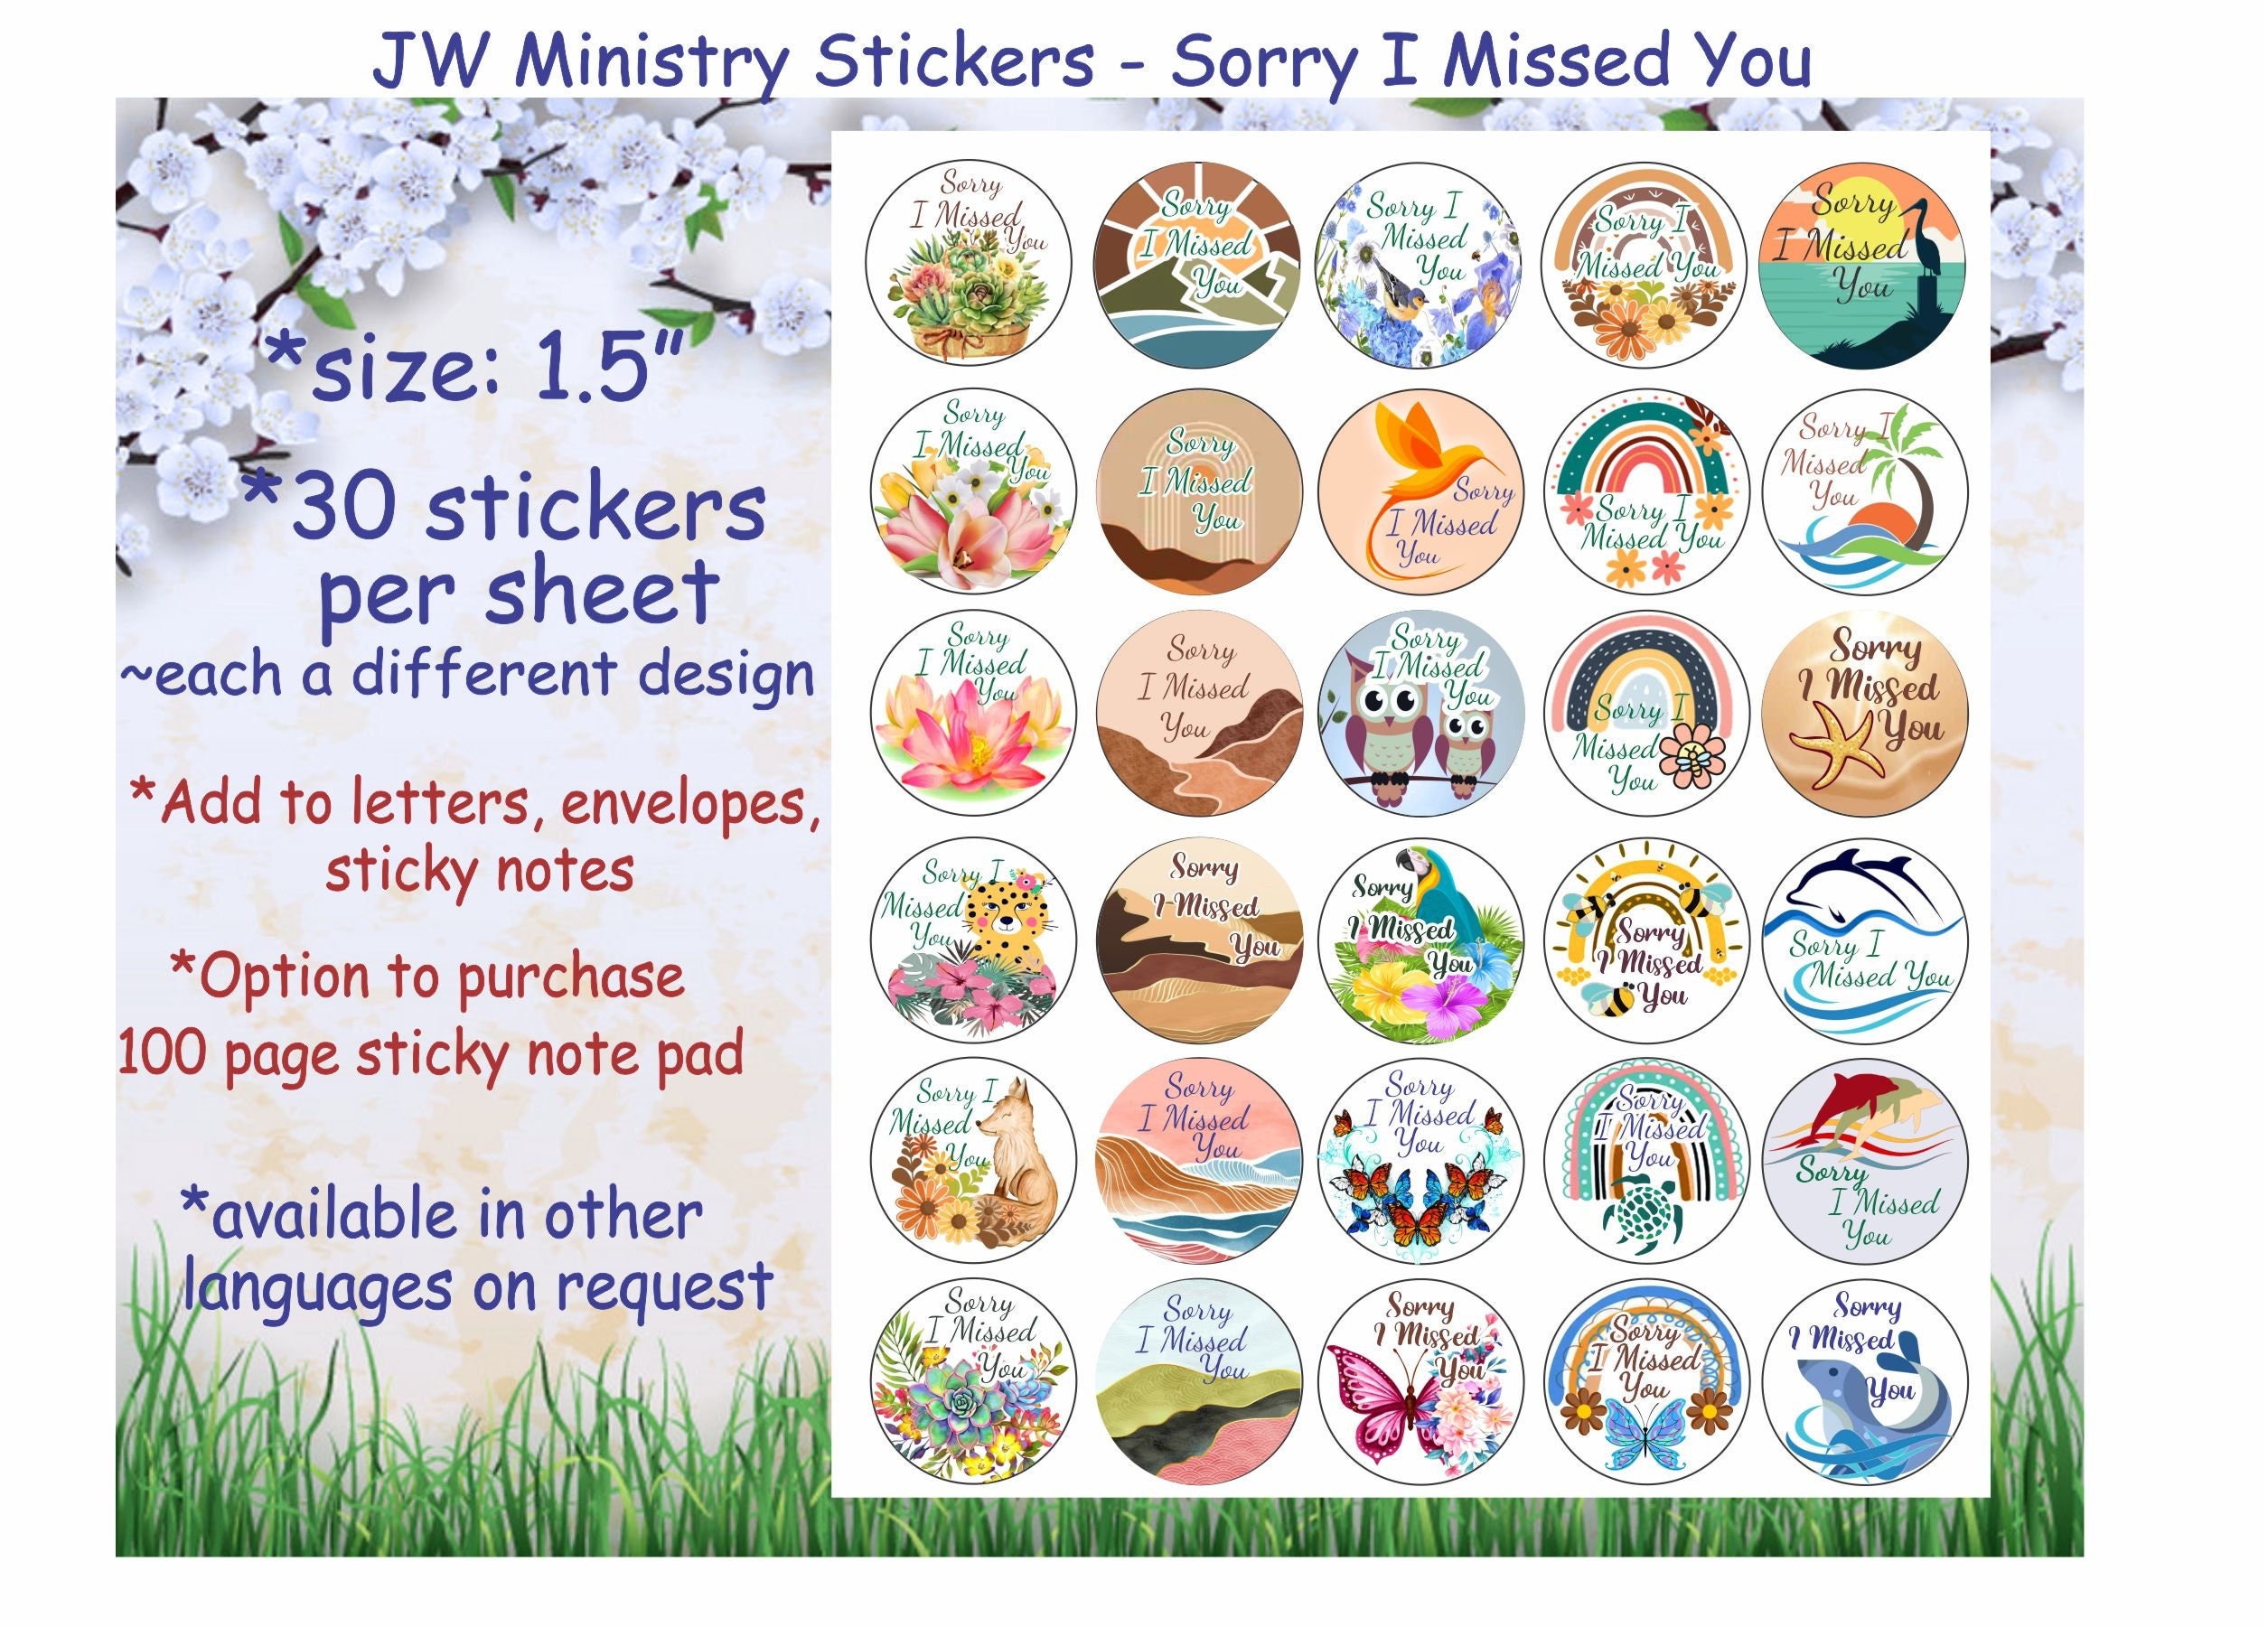 JW Gifts/ldc Drc/ministry 1.5 & 2.25 Pin,magnet,keychain/baptism